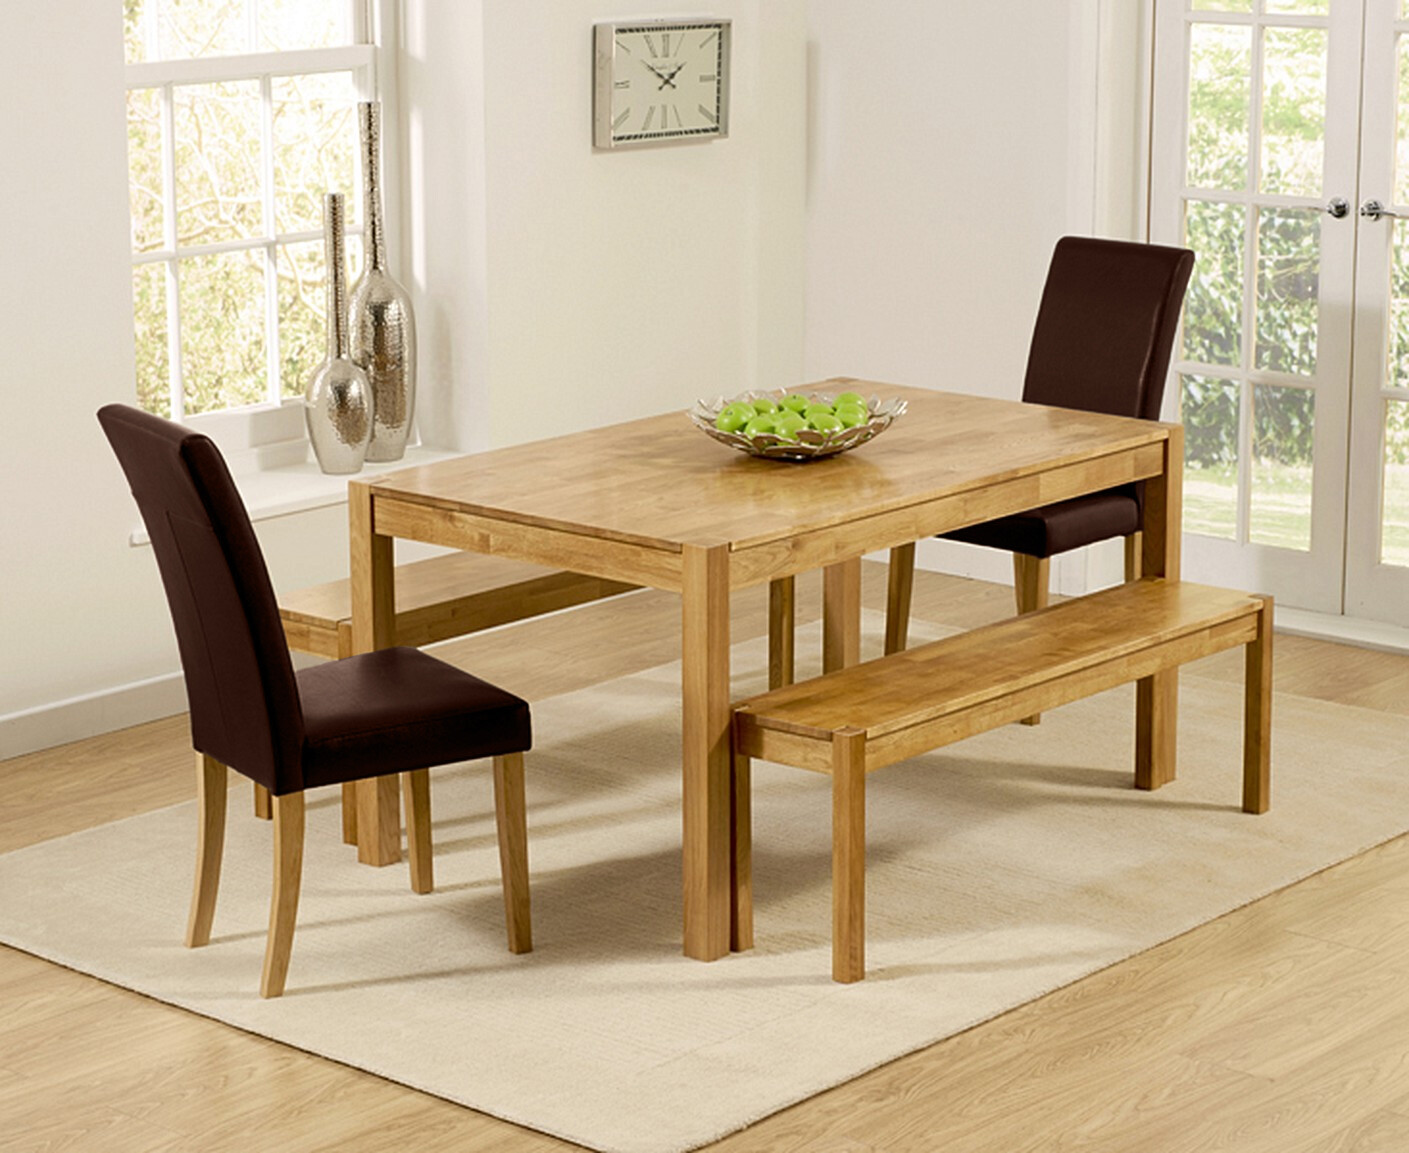 York 150cm Solid Oak Dining Table With 2 Brown Olivia Chairs And 2 York Bencheses